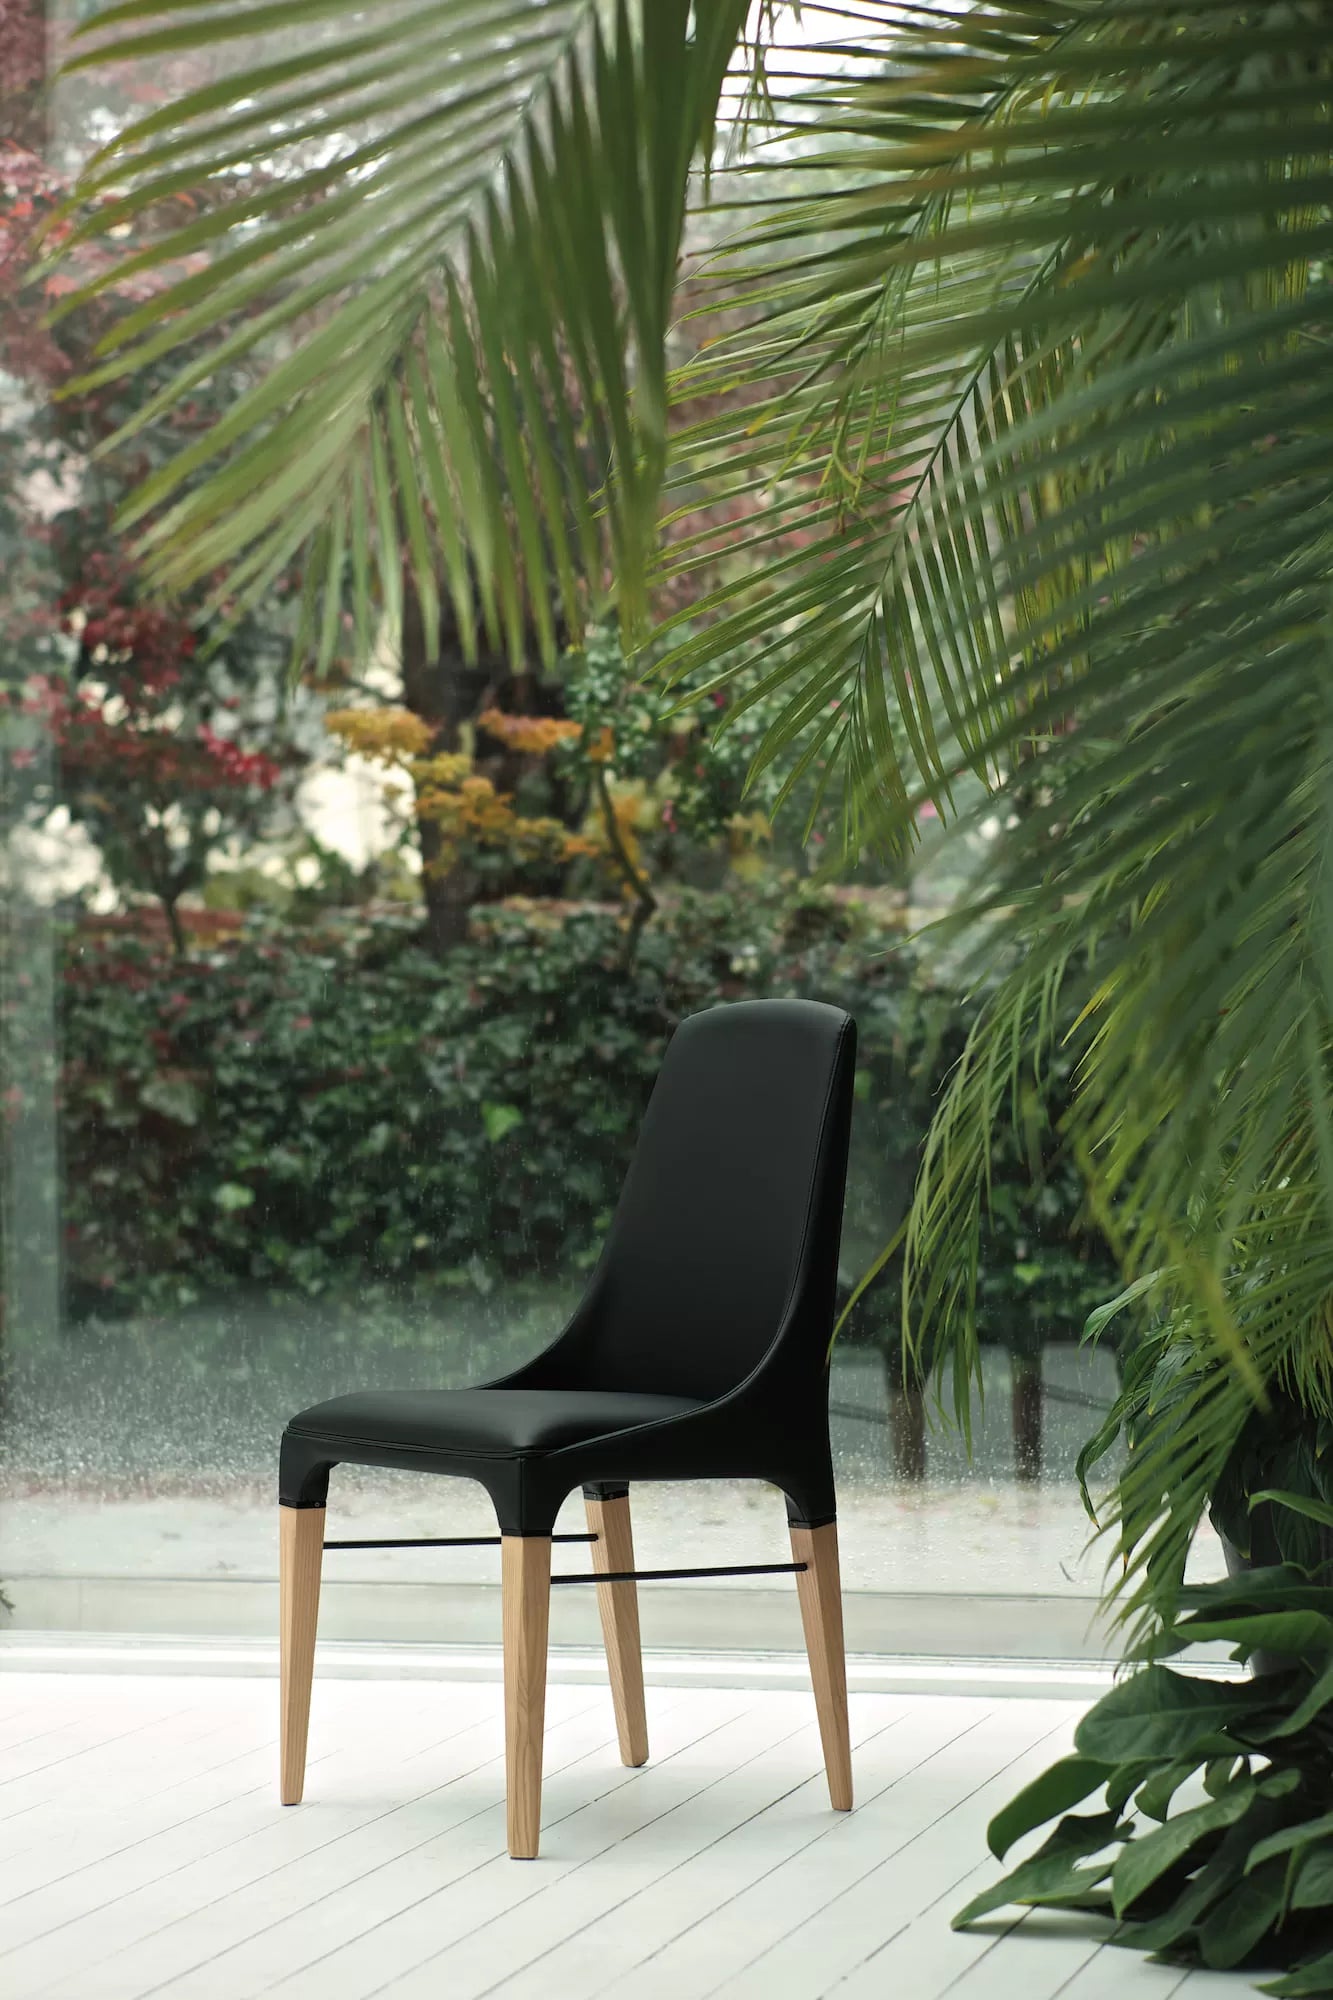 Kelly Chair With Solid Wood Frame And Frame Details In Metal